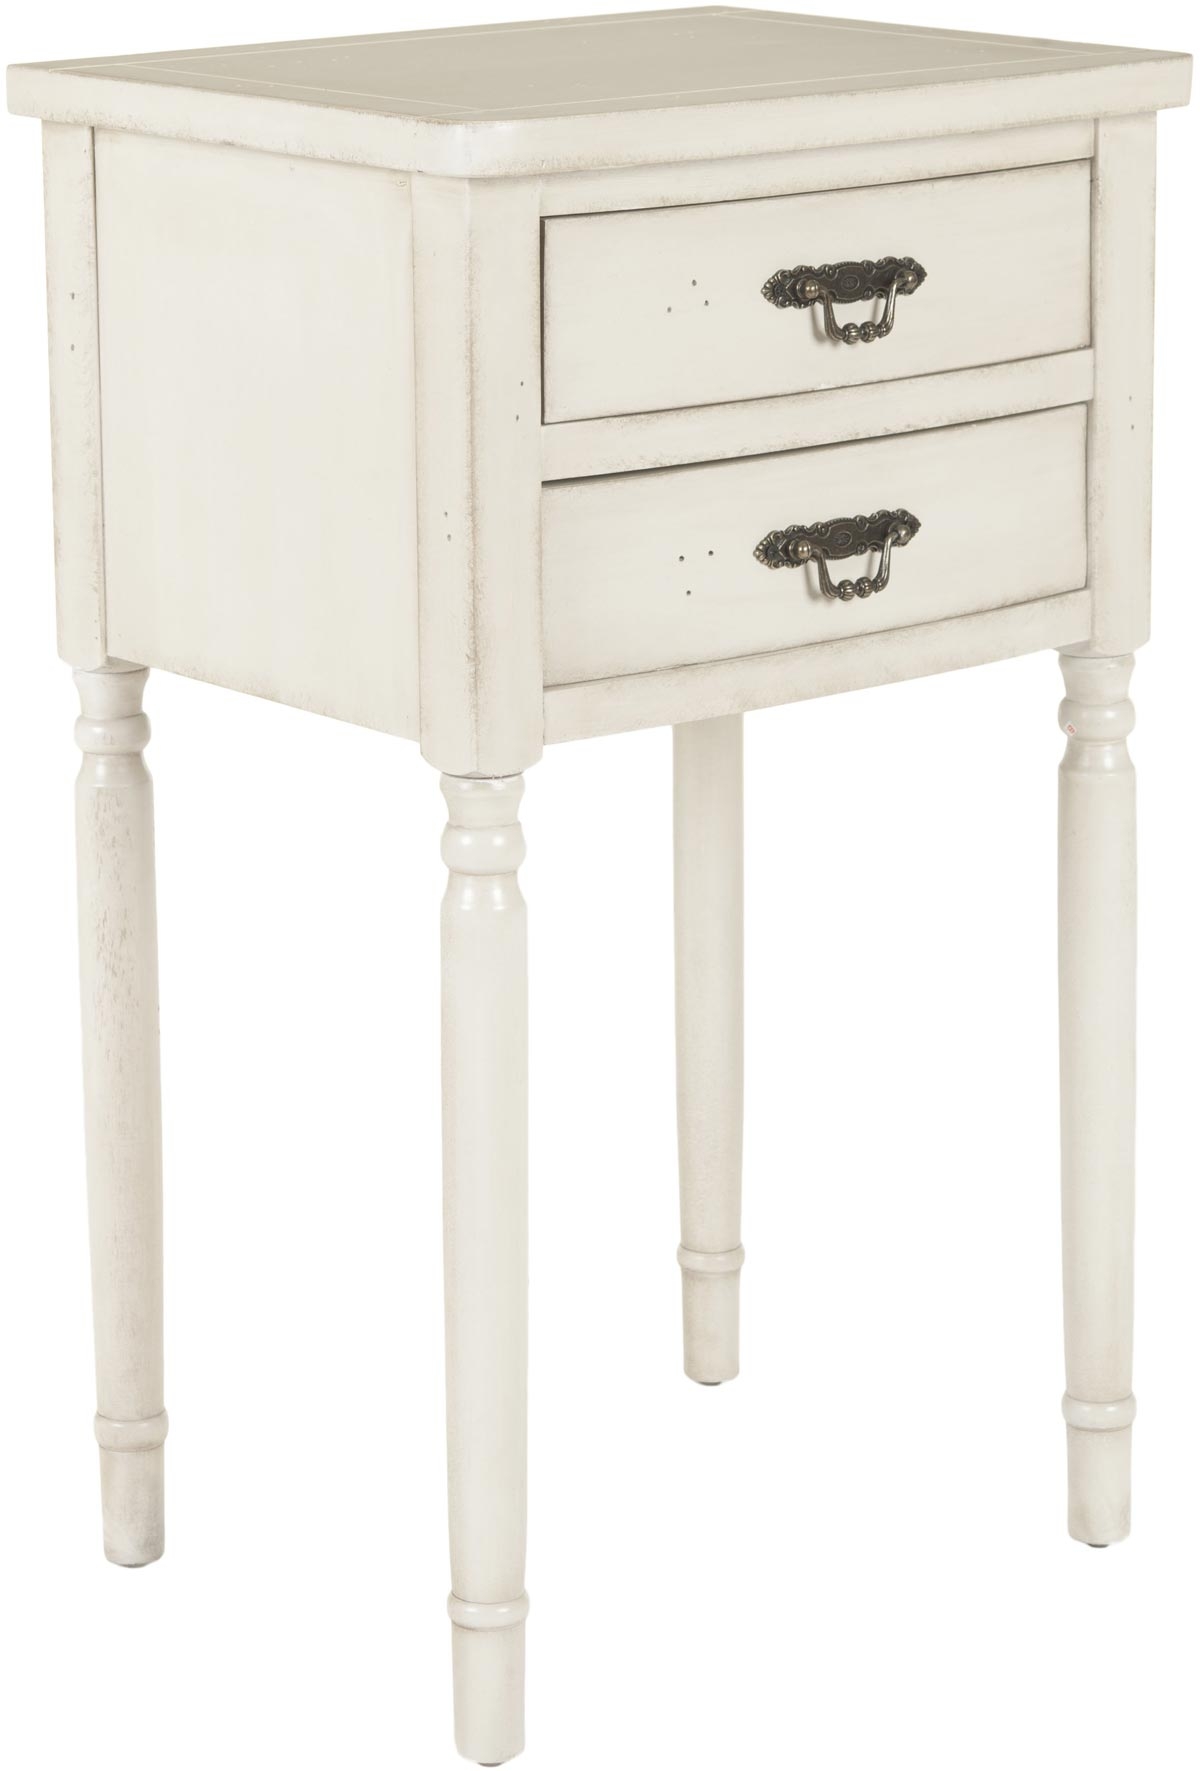 Marilyn End Table With Storage Drawers - White - Arlo Home - Image 2